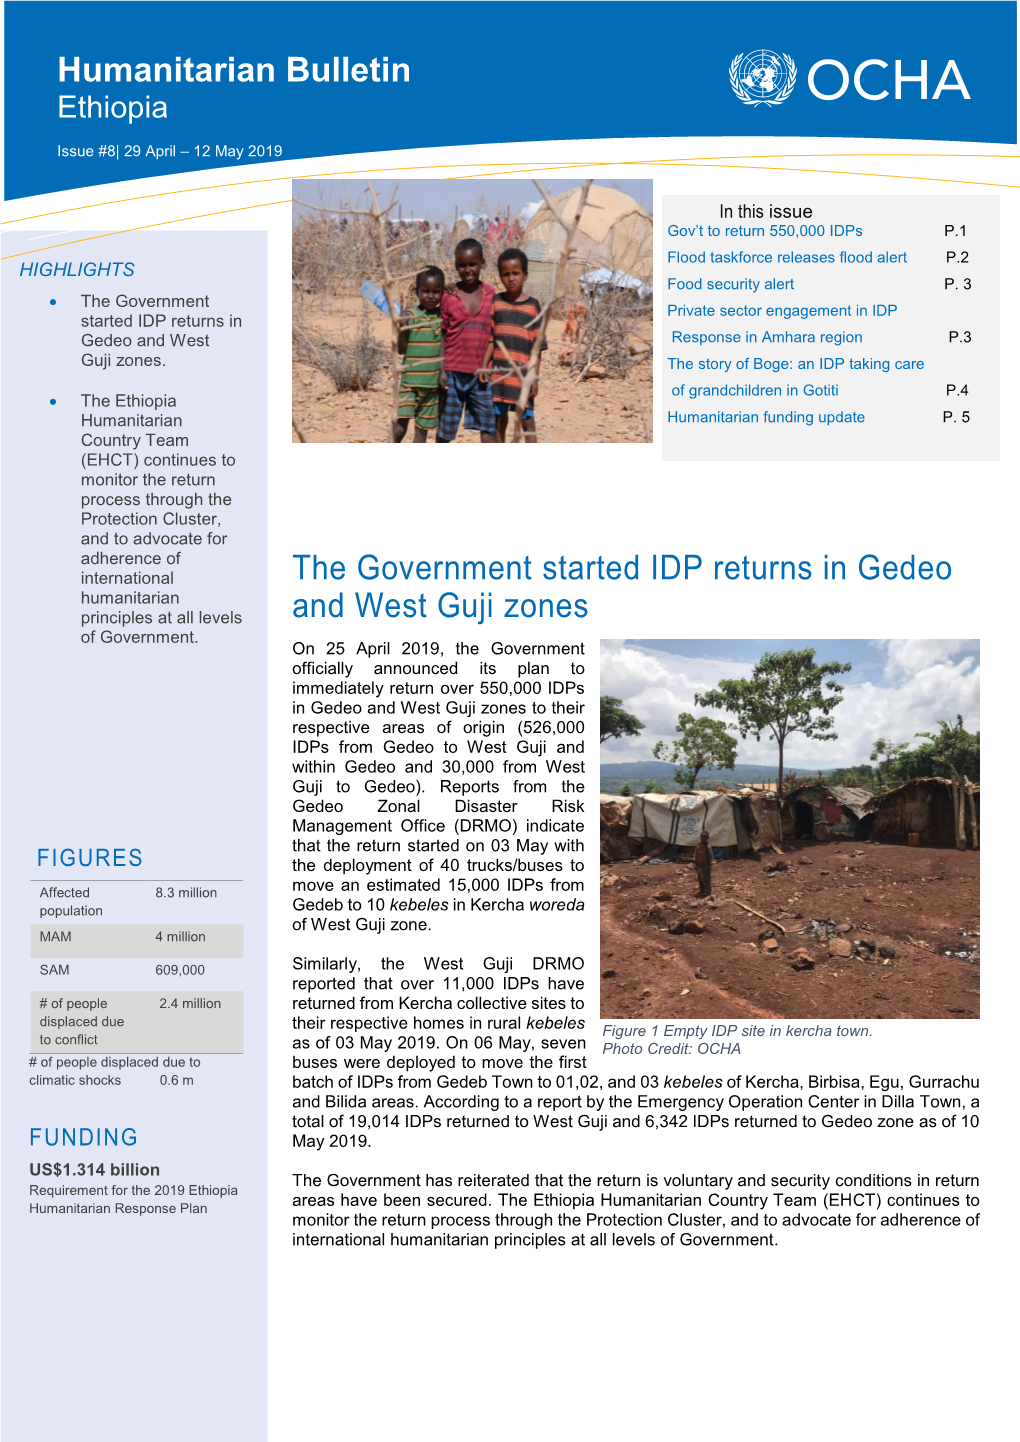 The Government Started IDP Returns in Gedeo and West Guji Zones Humanitarian Bulletin